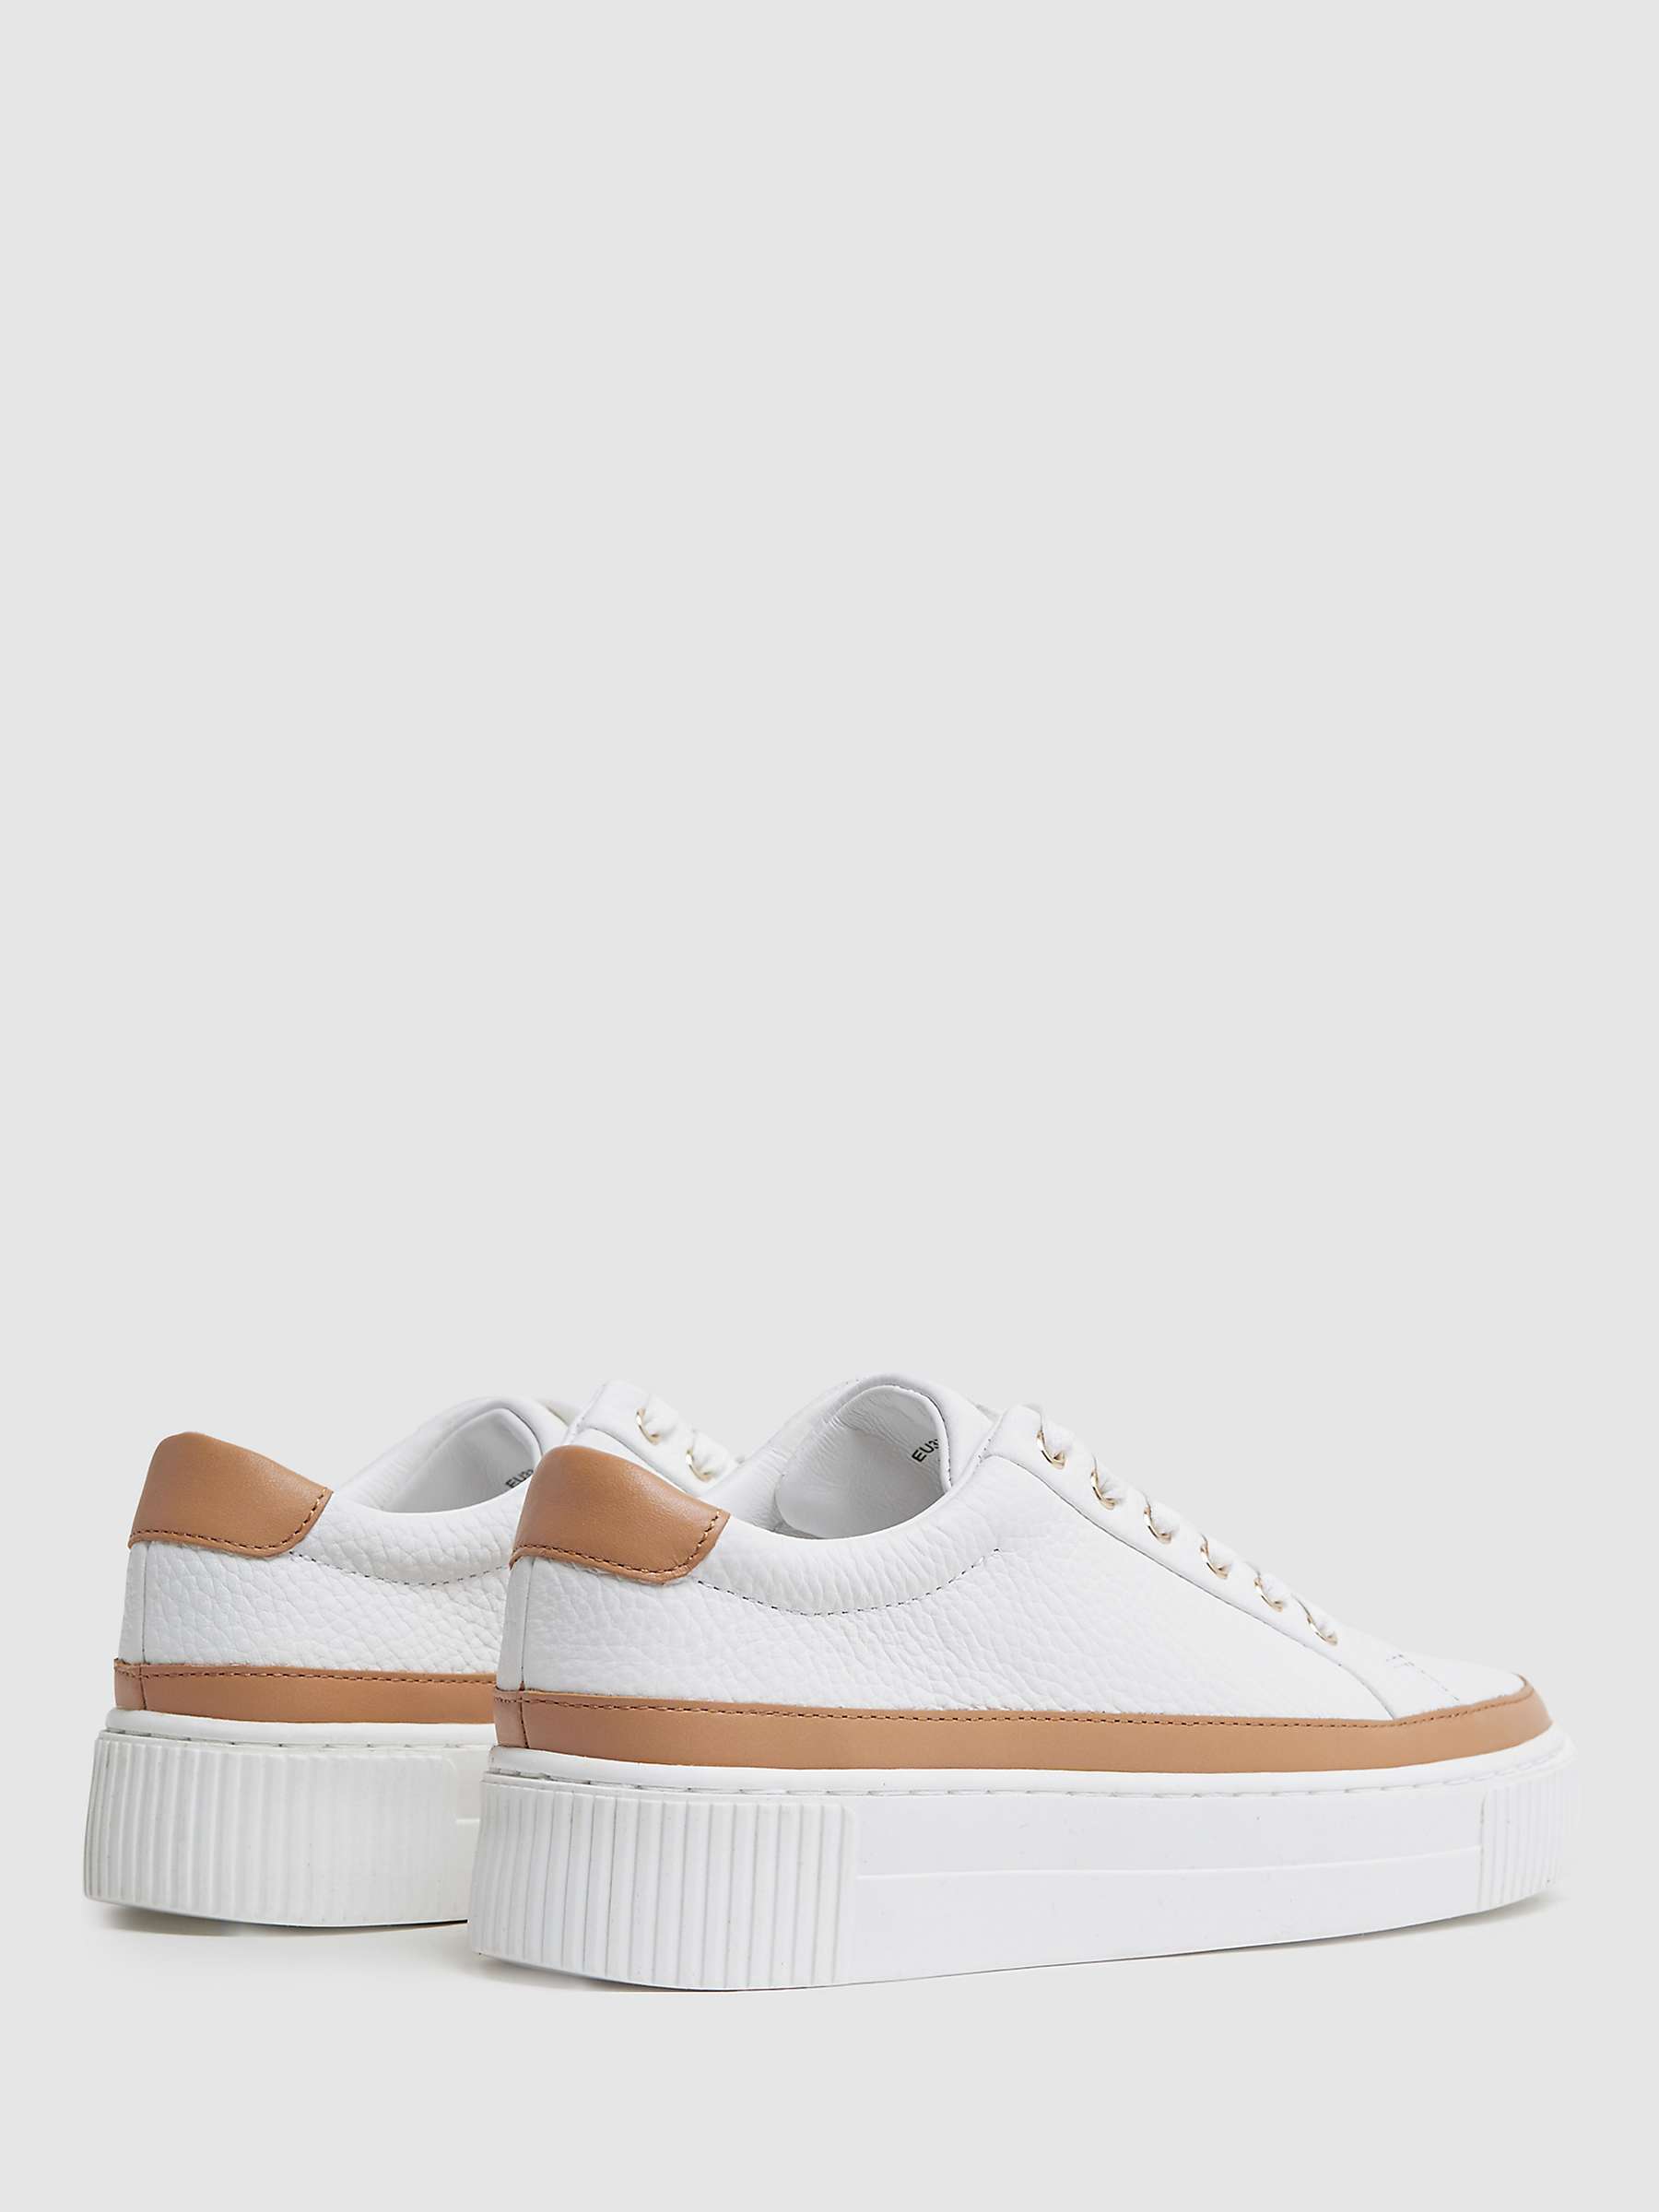 Buy Reiss Leanne Leather Low Top Trainers, Camel/White Online at johnlewis.com